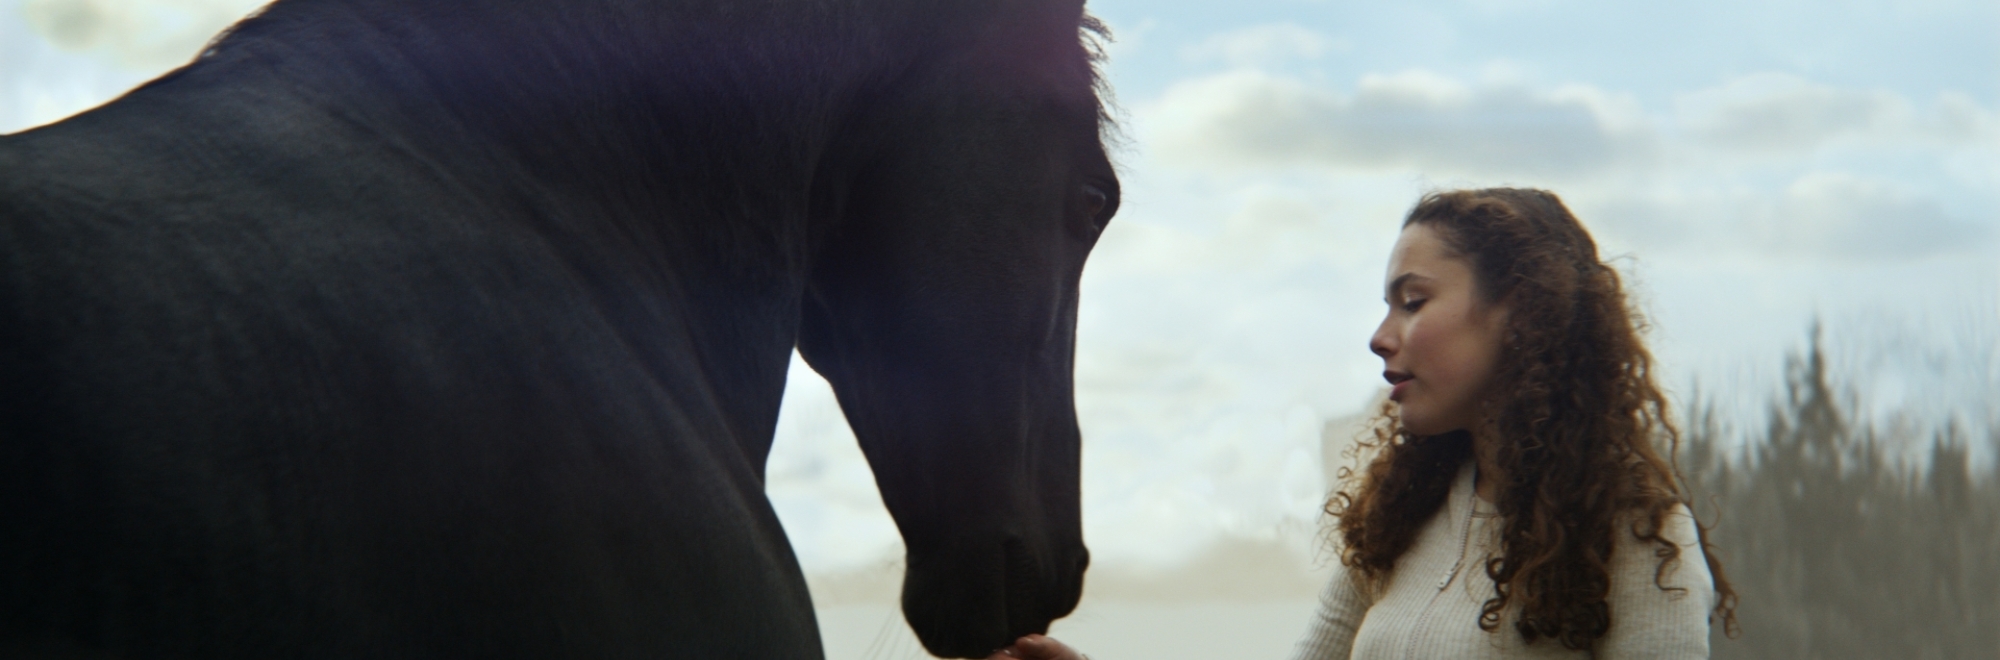 adam&eveDDB launches next chapter of iconic Lloyds Bank campaign